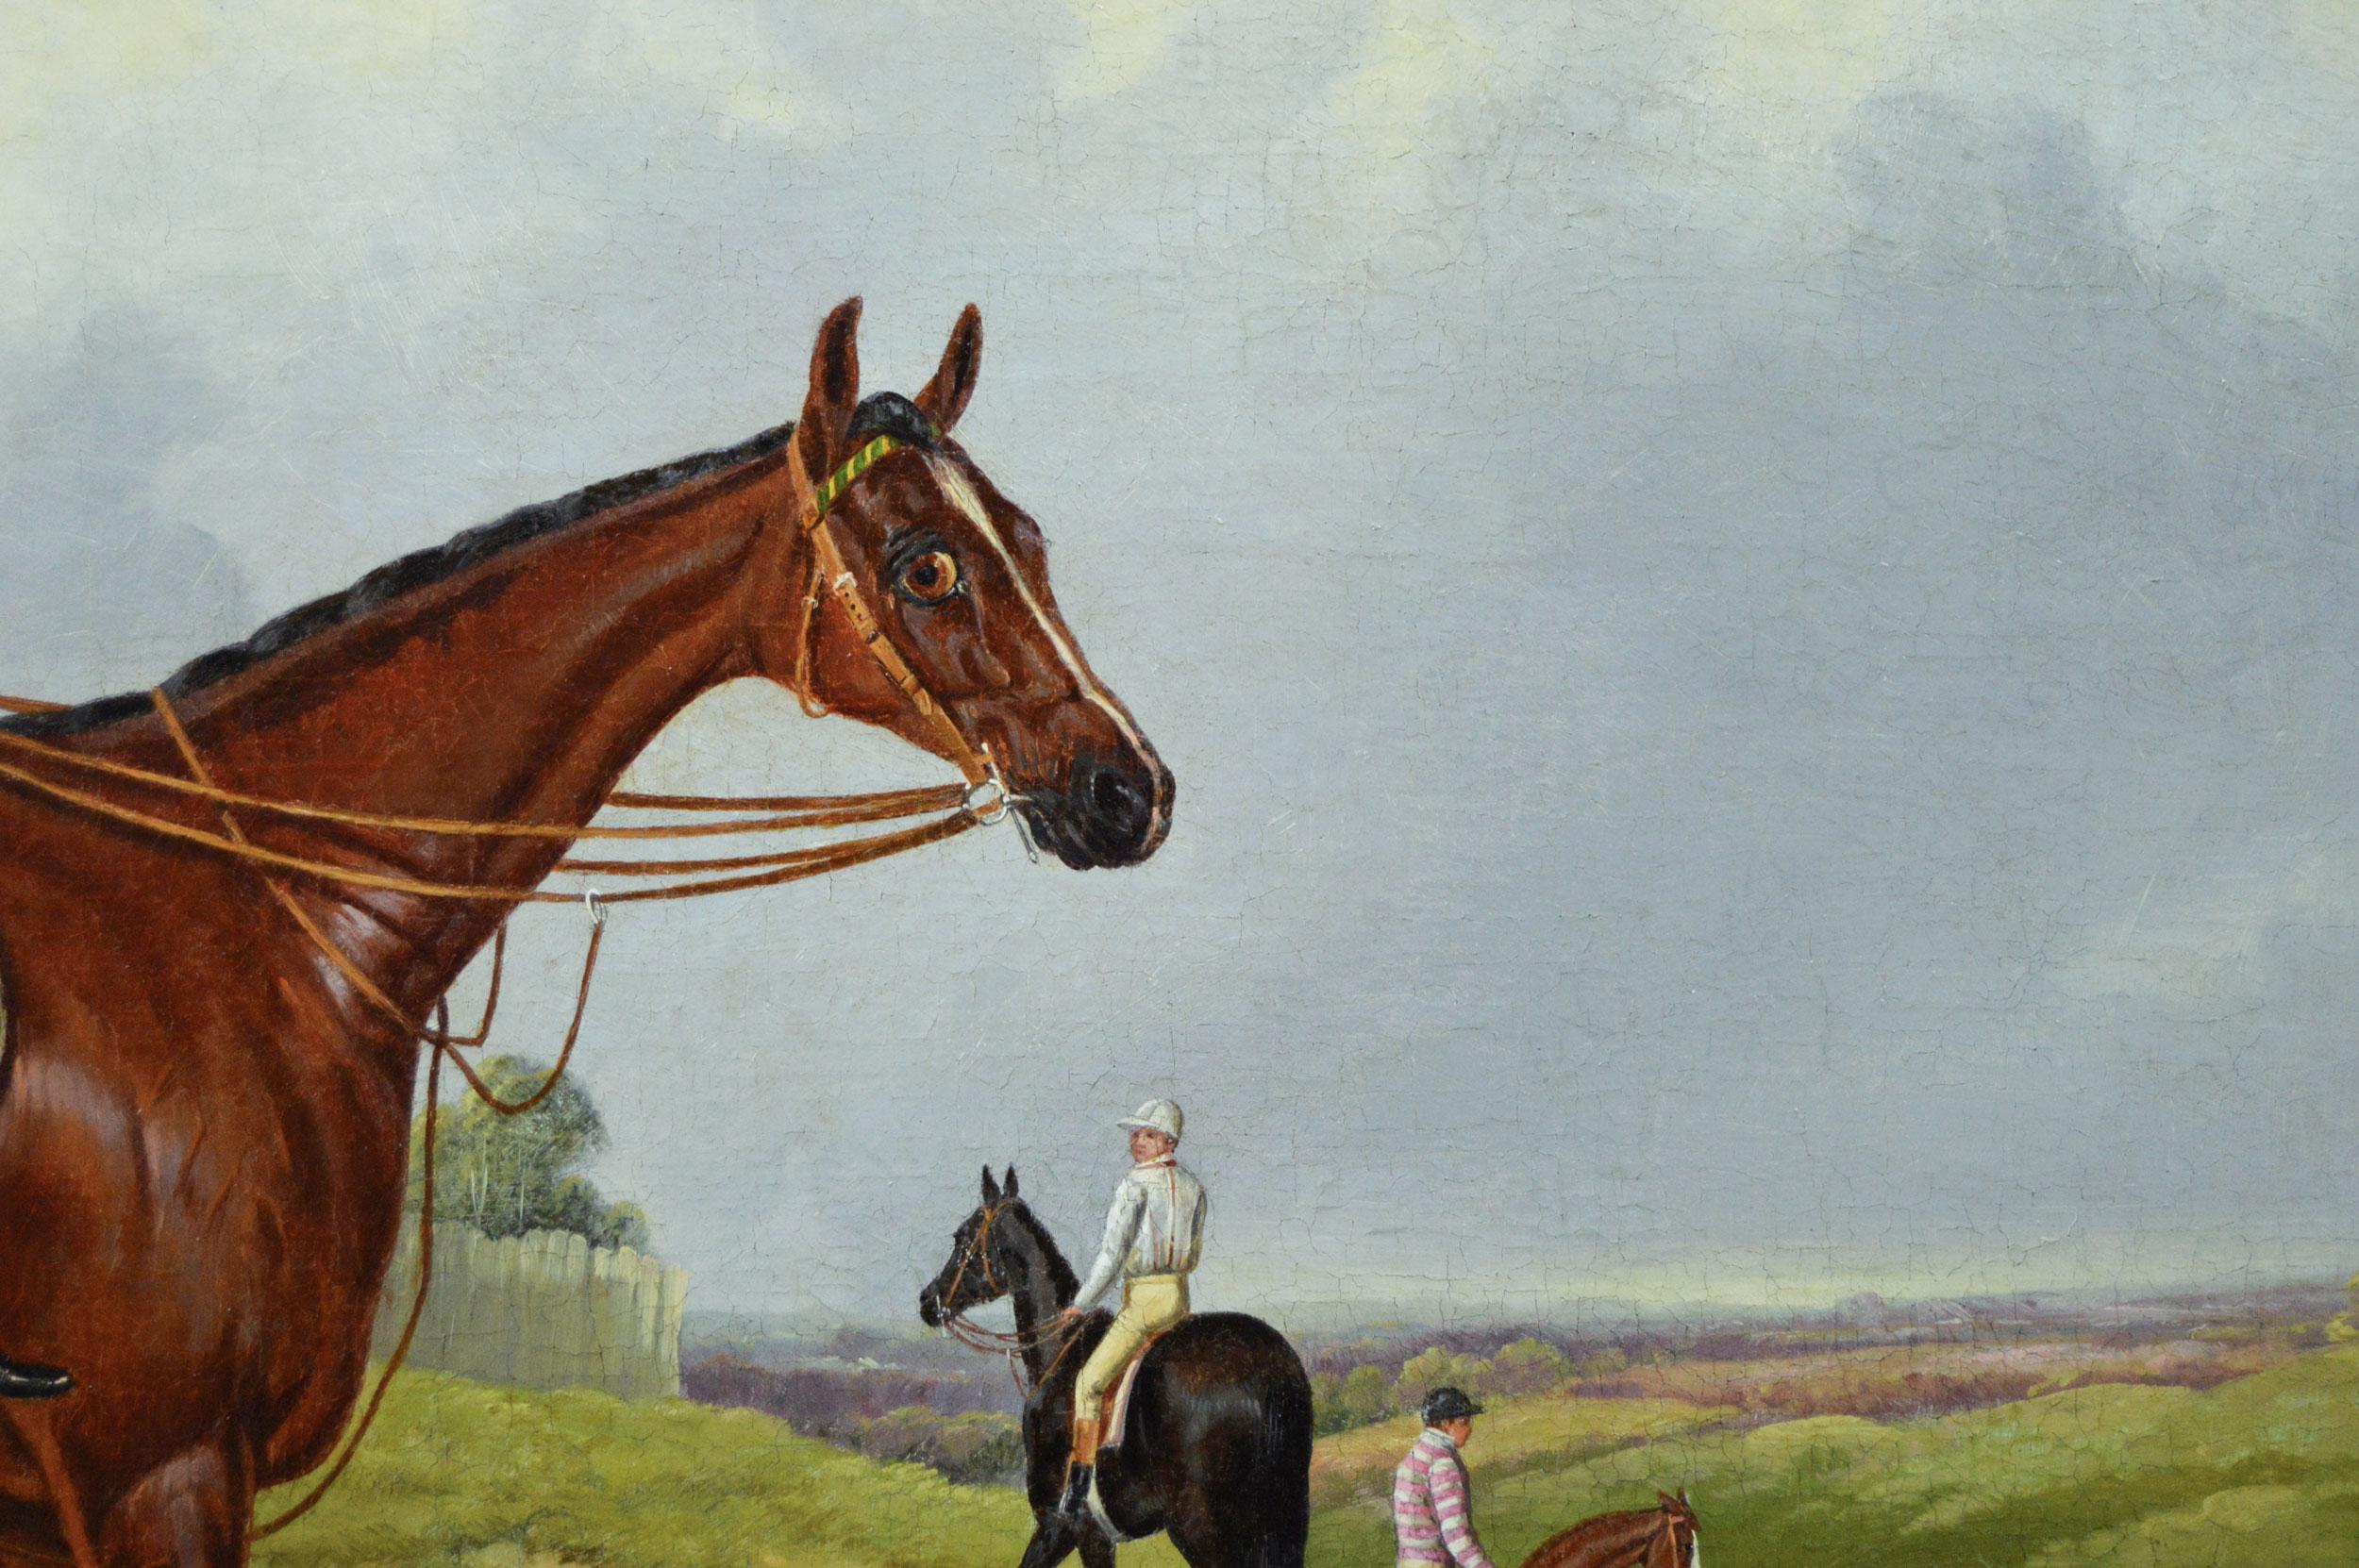 Harry Hall
British, (1815-1882)
Blink Bonny
Oil on canvas, signed & dated 1857
Image size: 25 inches x 31 inches 
Size including frame: 32.25 inches x 38.25 inches

This well executed sporting horse portrait by Harry Hall is of the famous racehorse